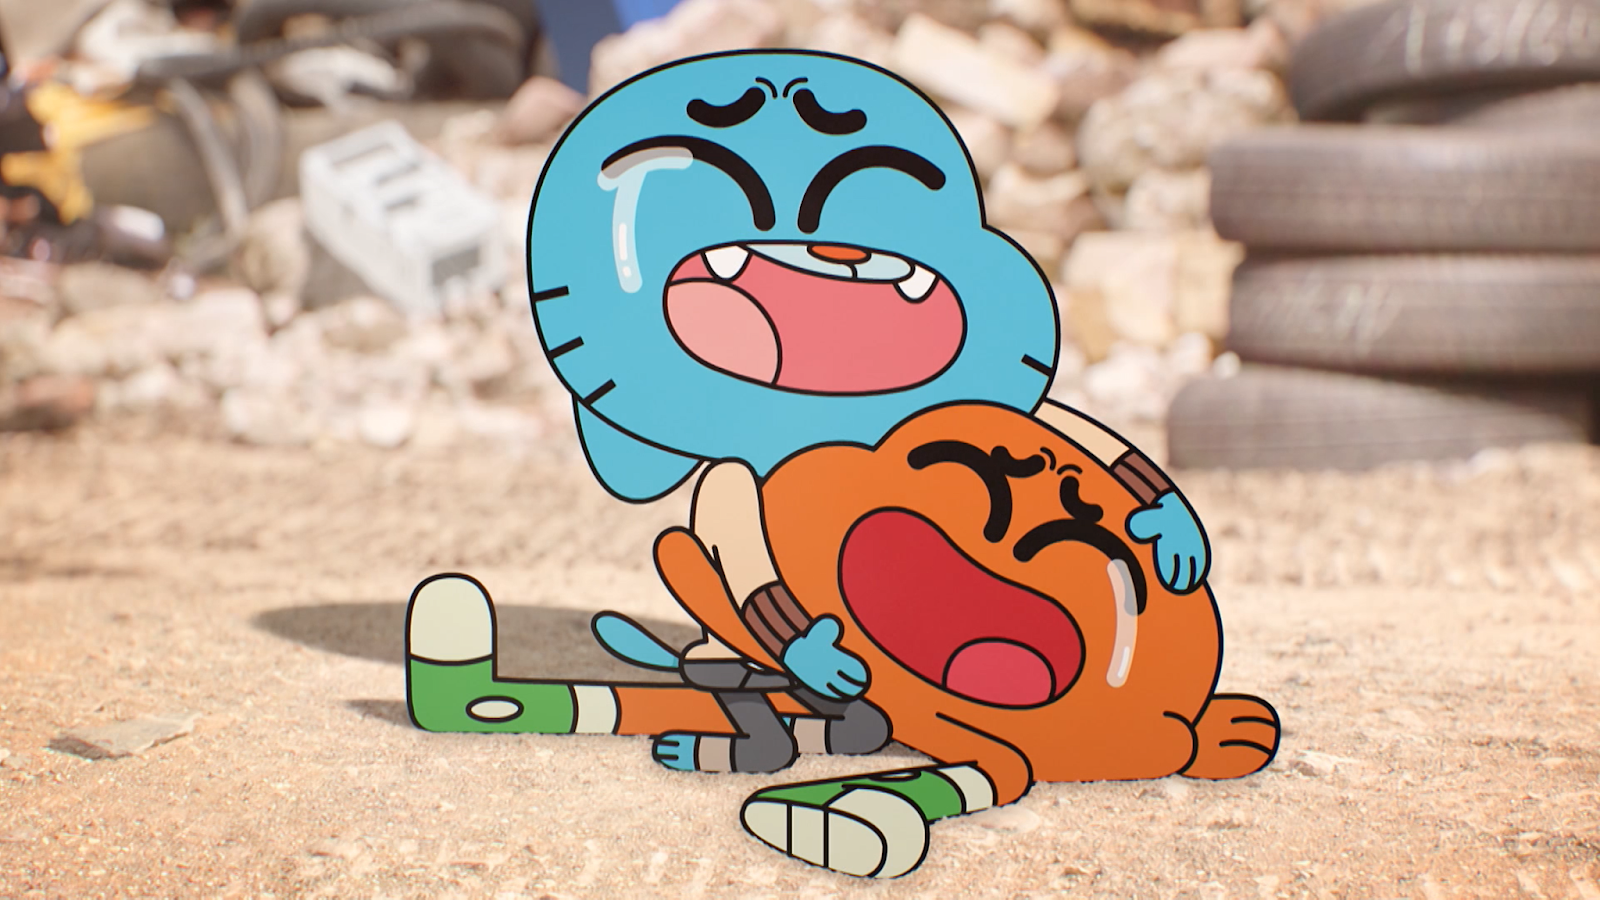 When the Watterson’s Internet goes down, Gumball and Darwin try to entertai...